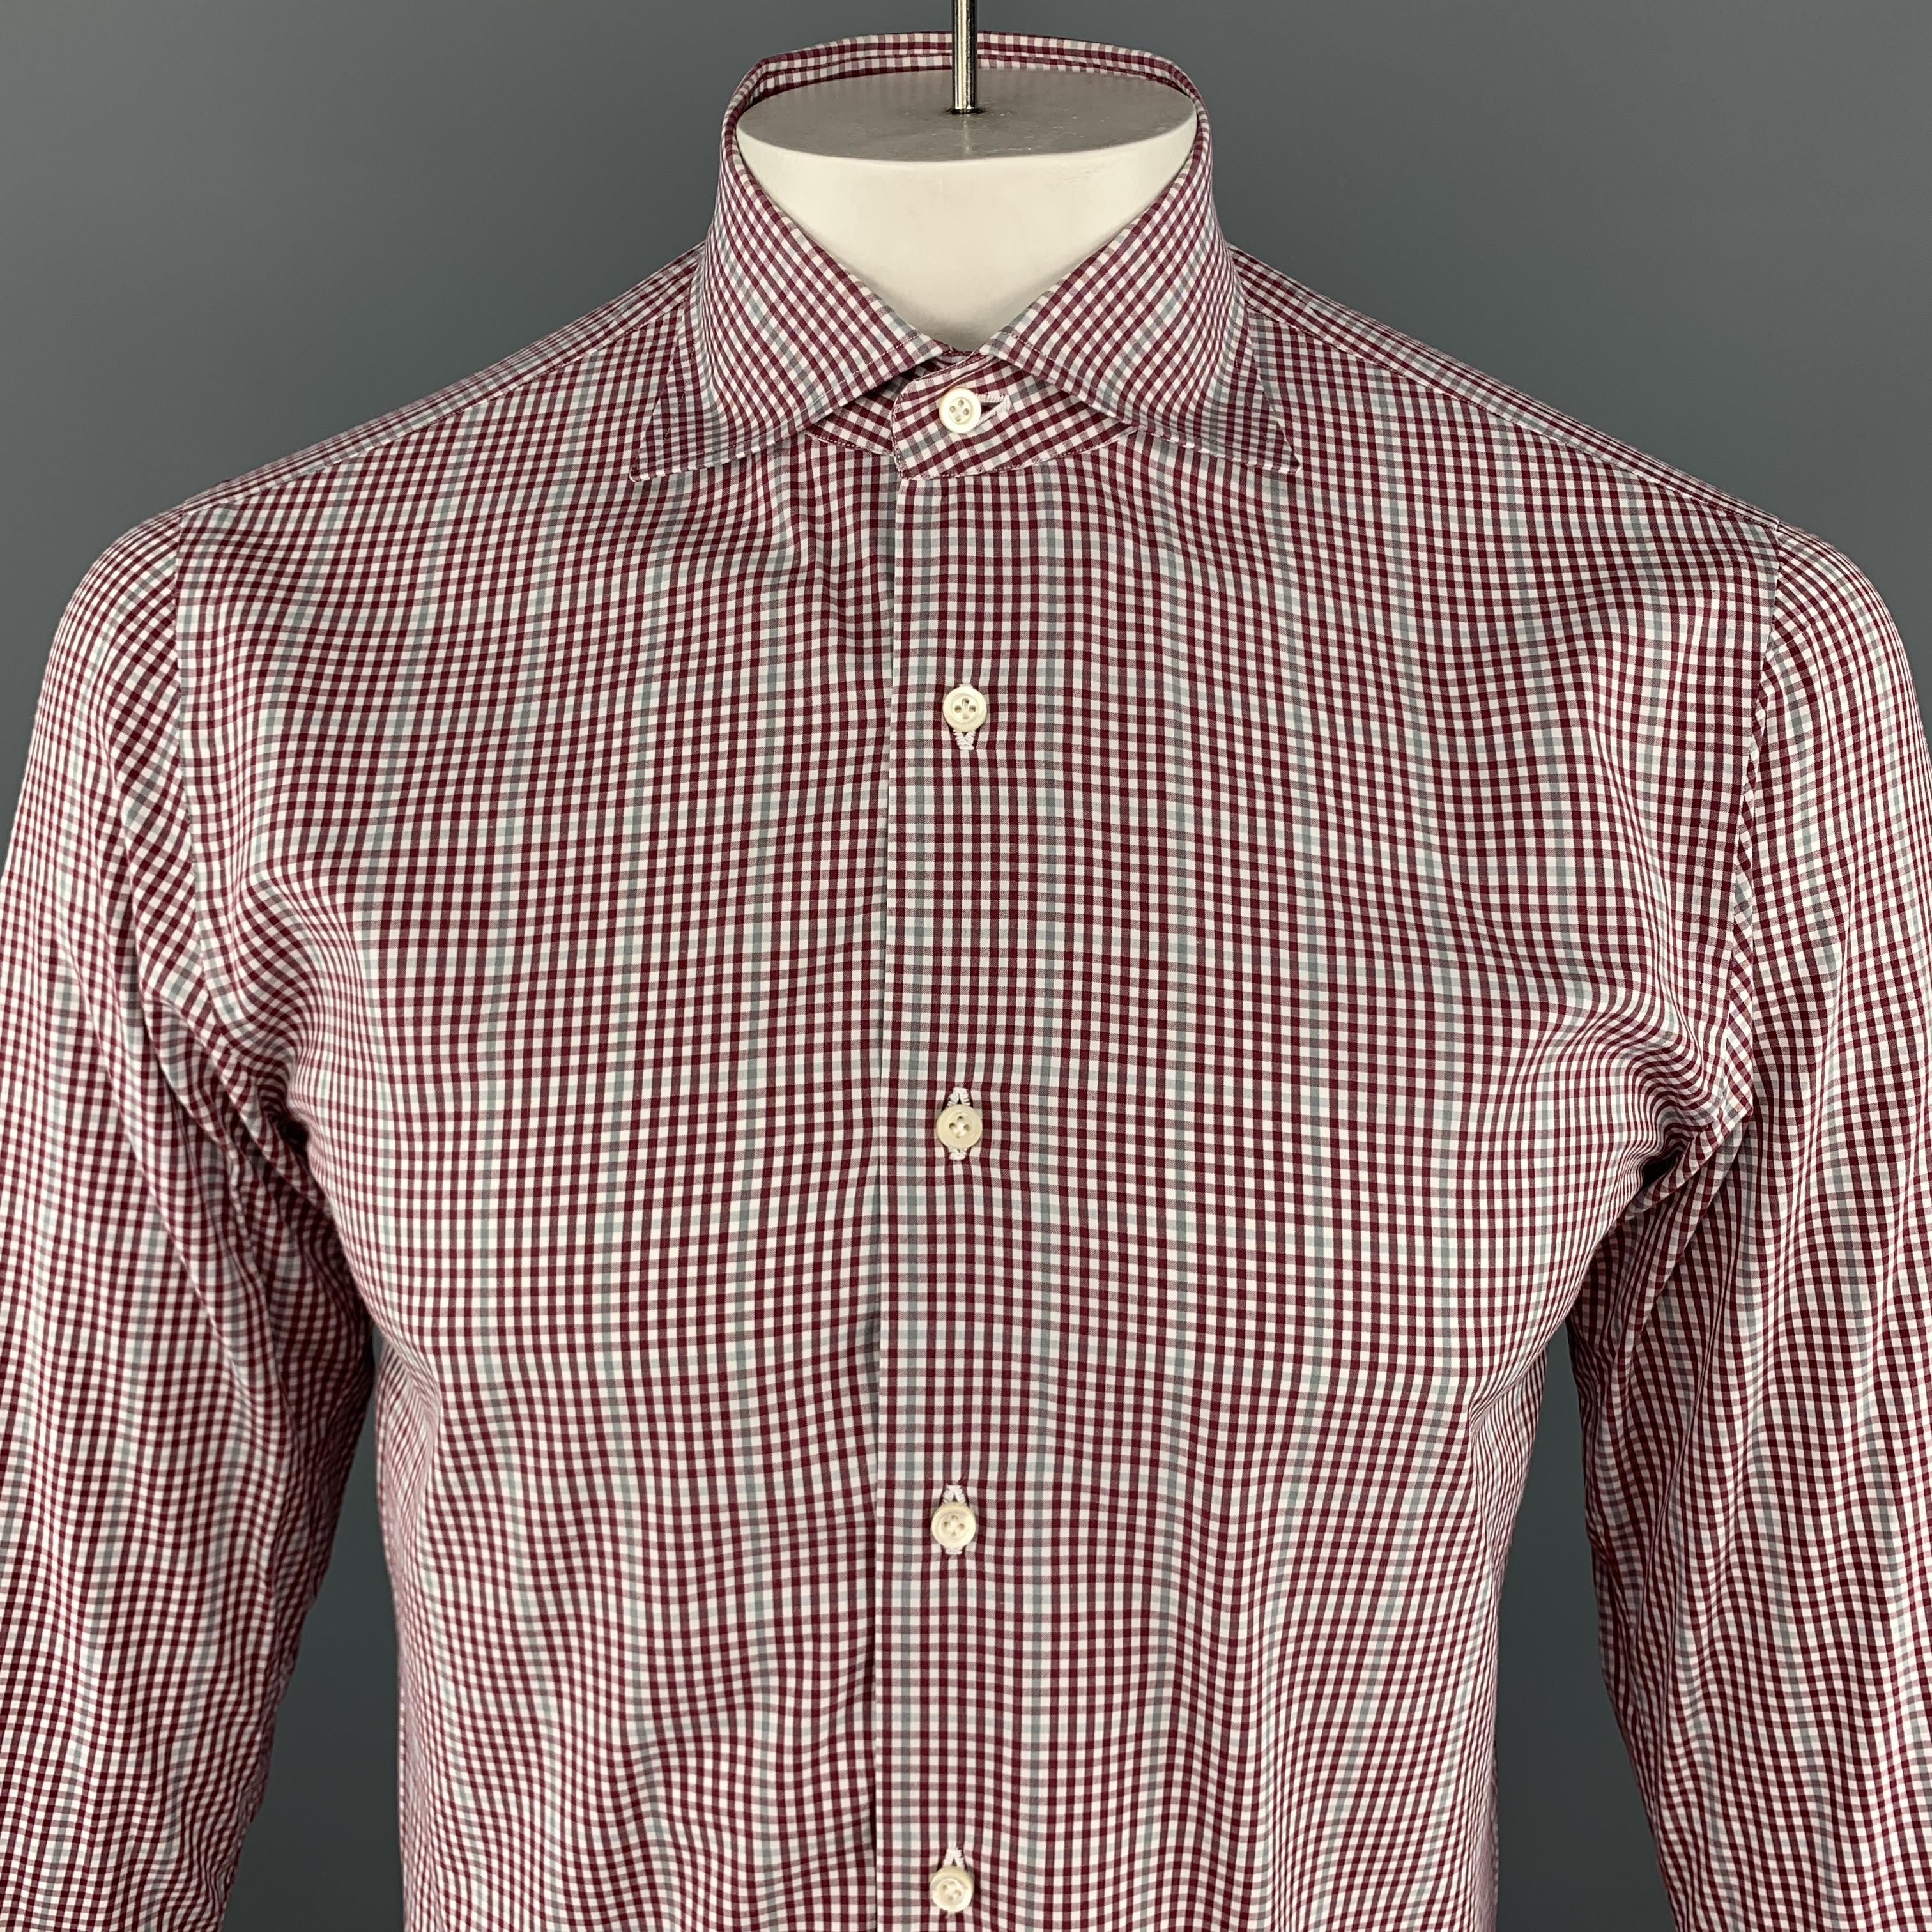 ISAIA Long Sleeve Shirt comes in burgundy and white tones in a plaid cotton material, with a spread collar, buttoned cuffs, button up. Made in Italy.

Excellent Pre-Owned Condition.
Marked: IT 39

Measurements:

Shoulder: 16 in. 
Chest: 41 in.